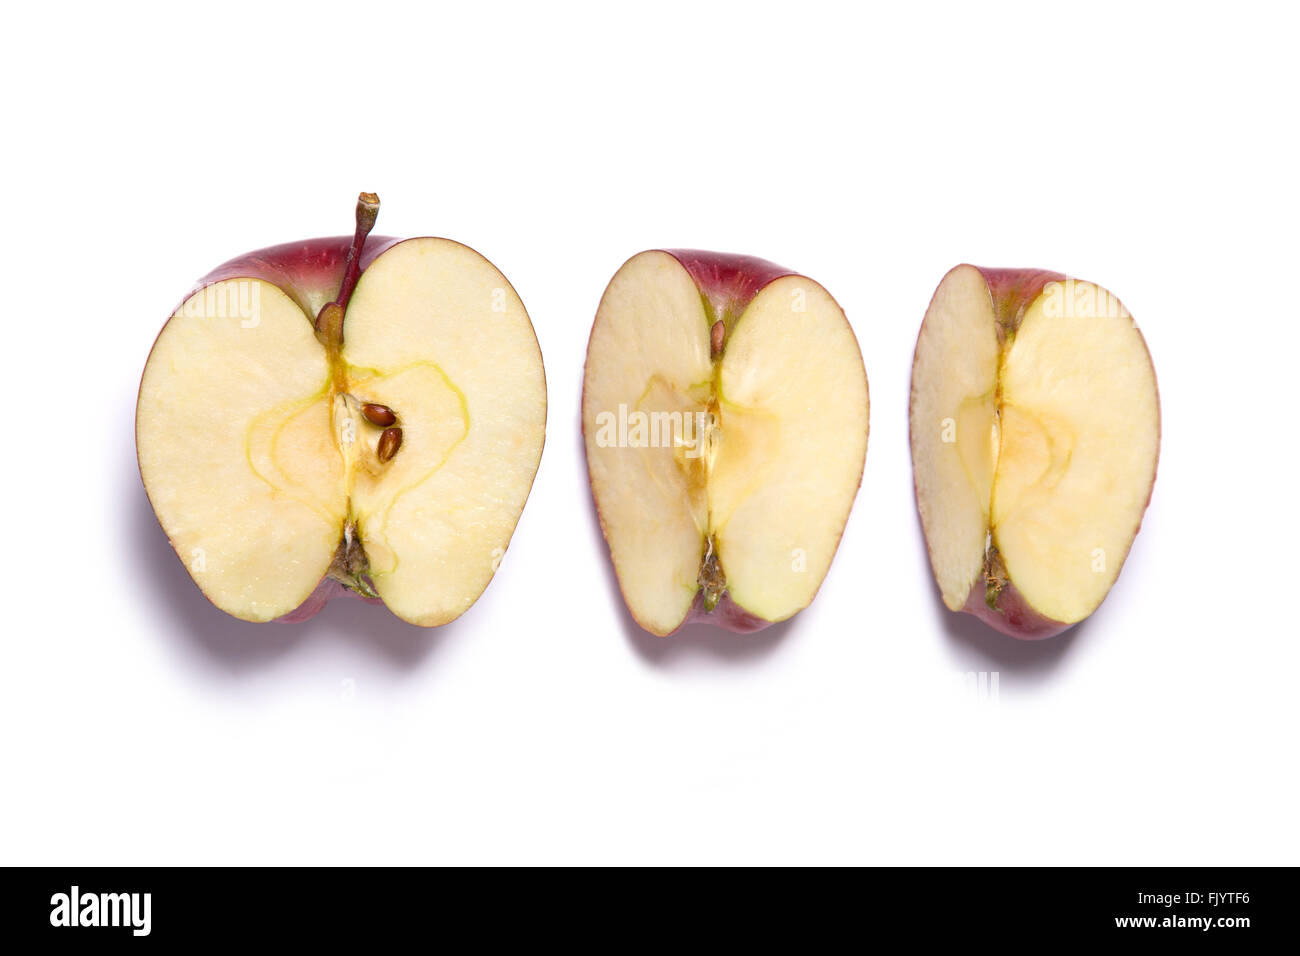 https://c8.alamy.com/comp/FJYTF6/red-delicious-apple-cut-in-half-and-quarters-top-view-isolated-on-FJYTF6.jpg